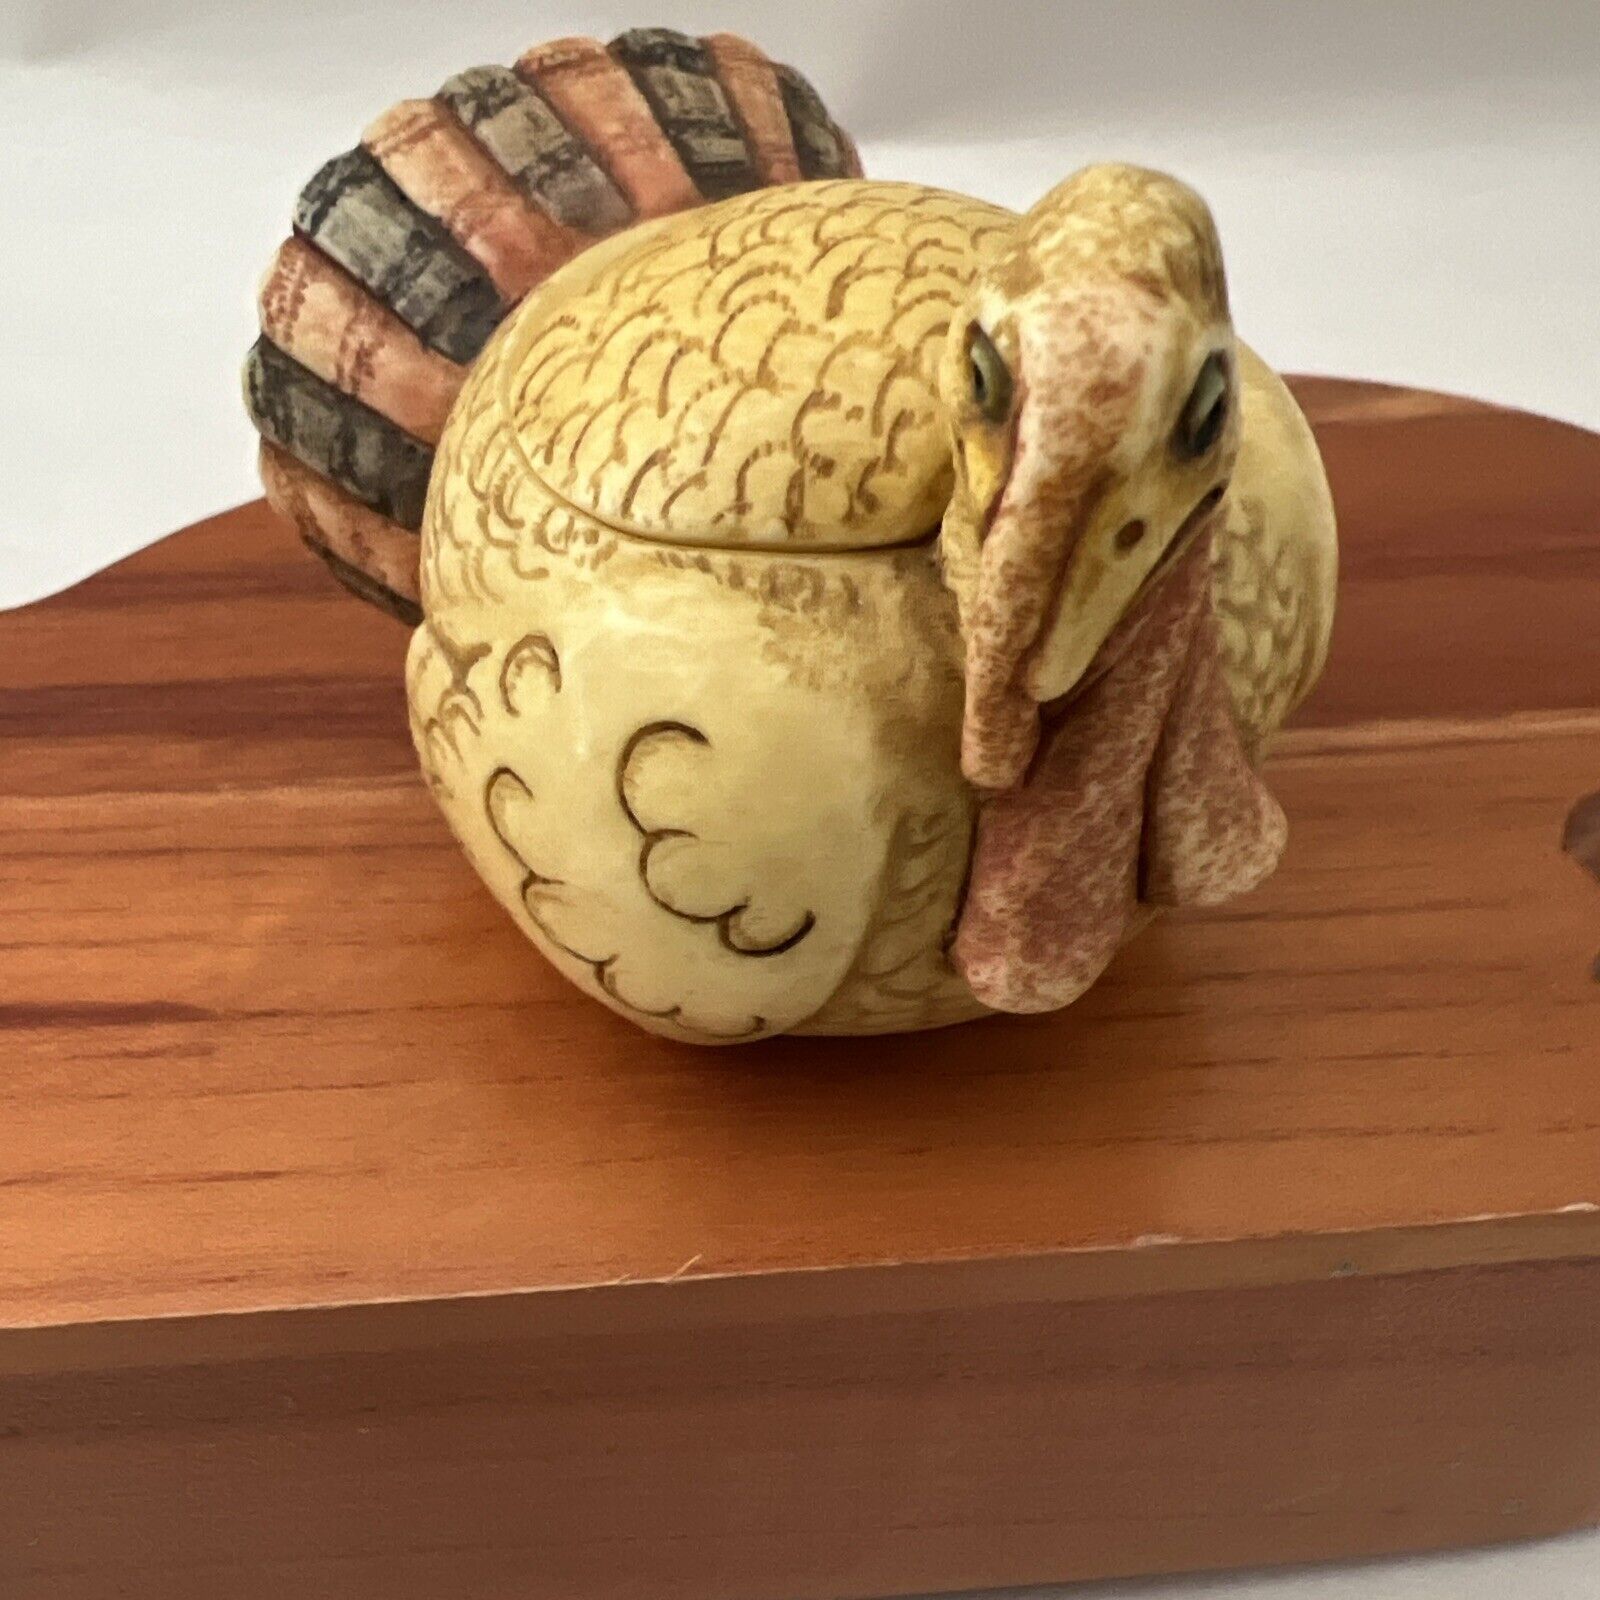 Harmony Ball Pot Bellys “Perkie” the Turkey Collectible Figurine w/ Card